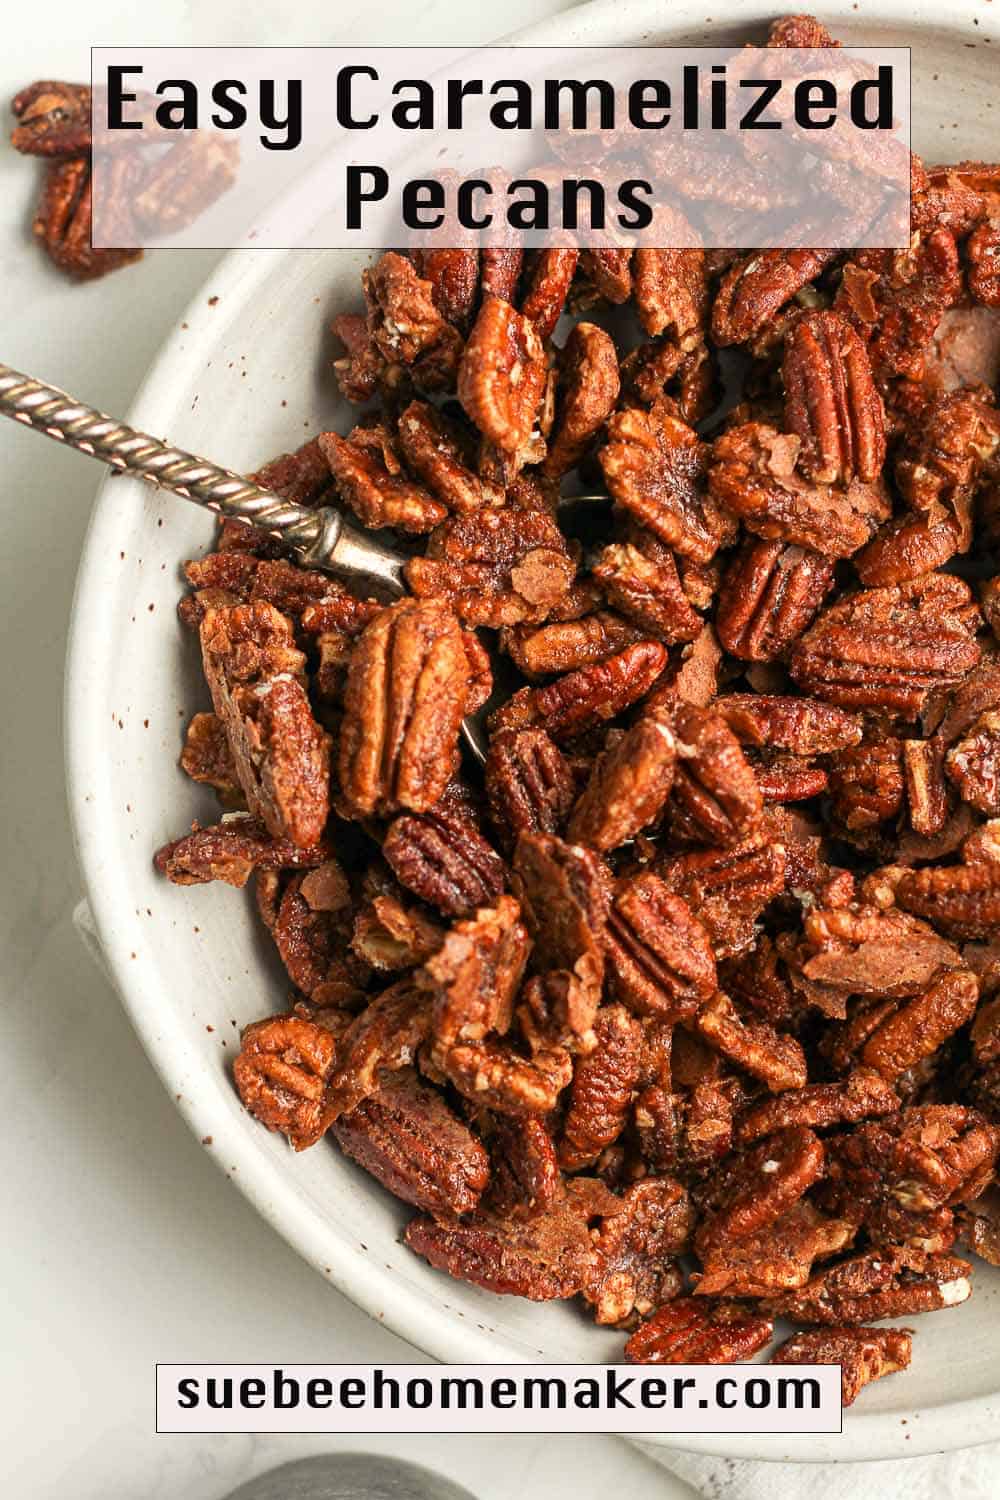 A bowl of caramelized pecans.